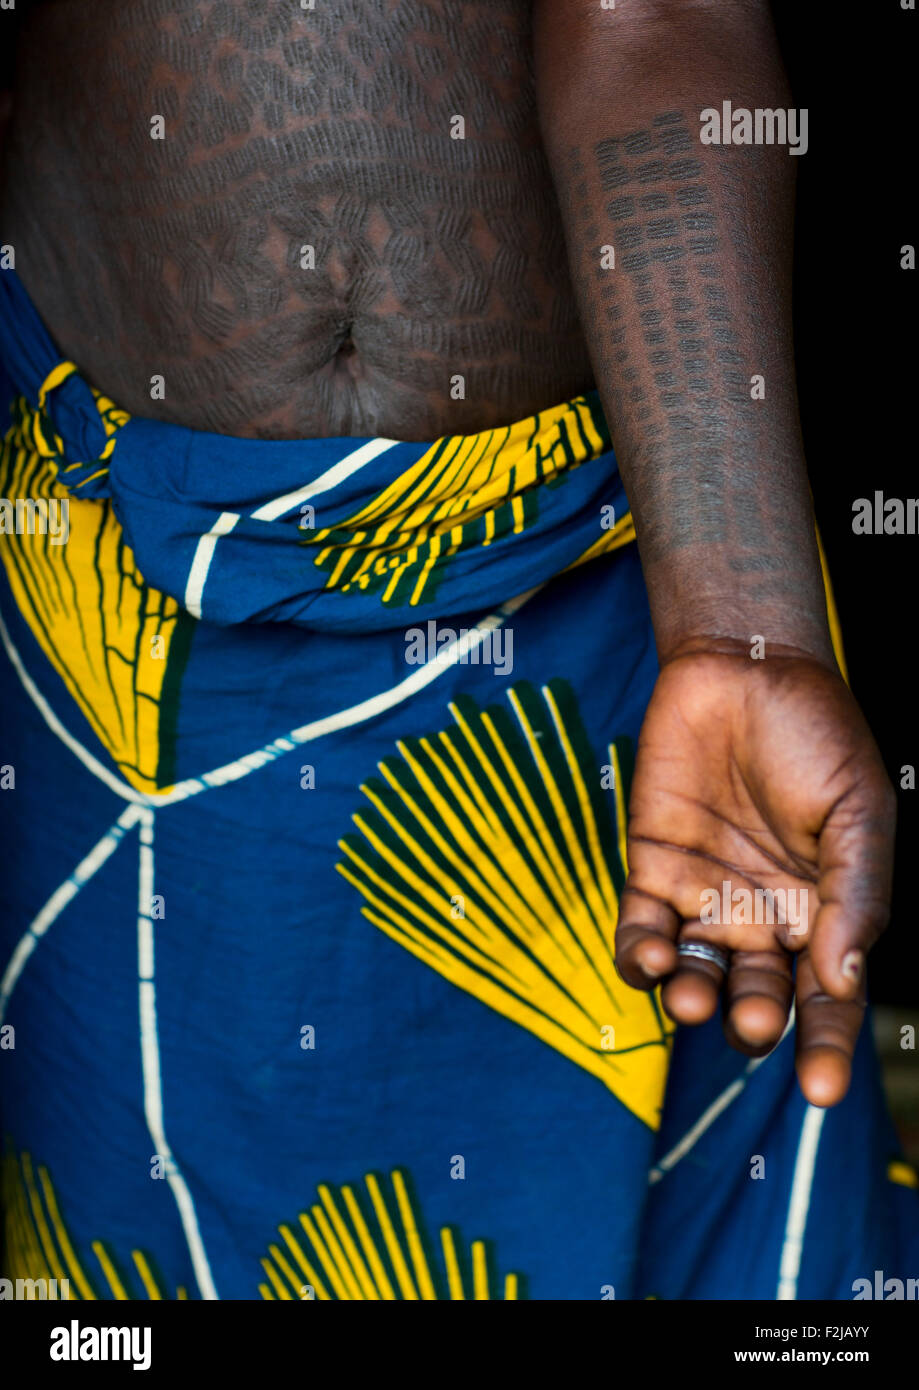 146 African Tribal Tattoo Stock Photos HighRes Pictures and Images   Getty Images